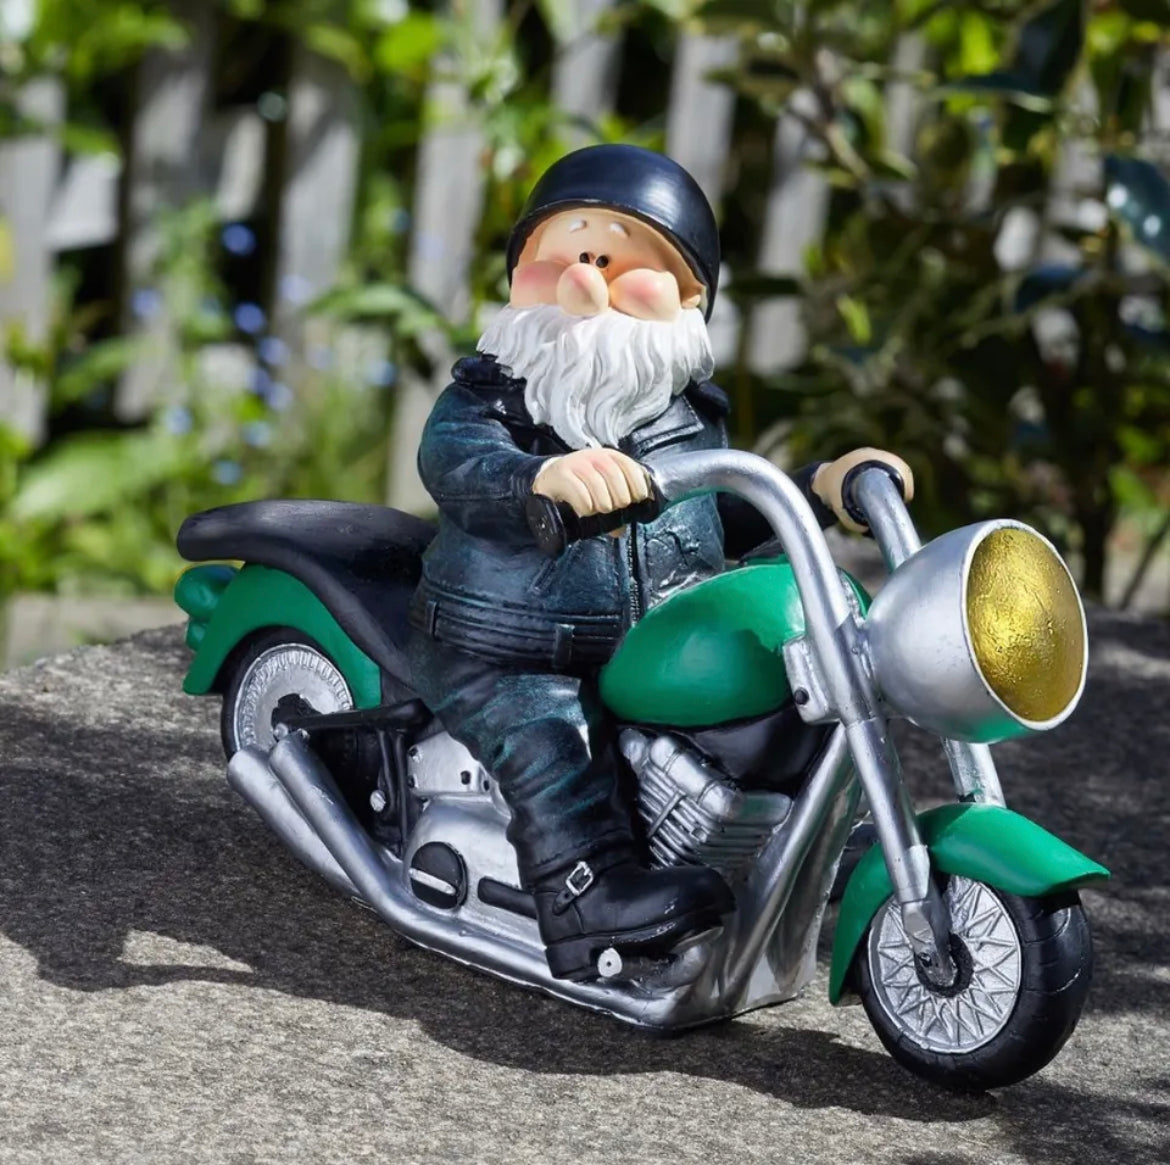 Gnome On A Motorcycle